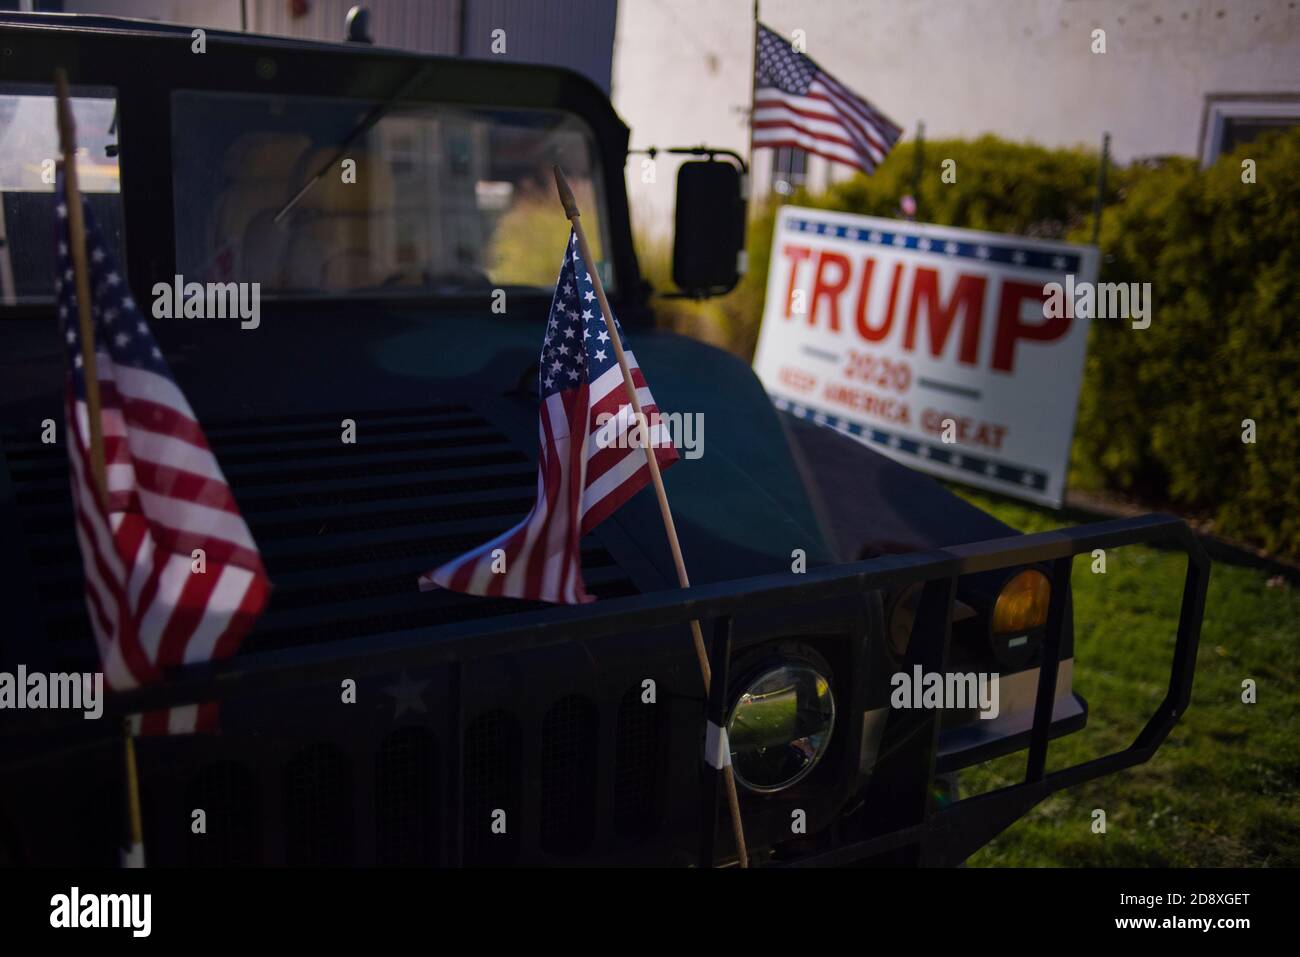 Jeep vehicle proudly displays American Flags and Trump signs in support of Constitution, Second Amendment, during Trump rally, Montoursville PA. USA. Stock Photo